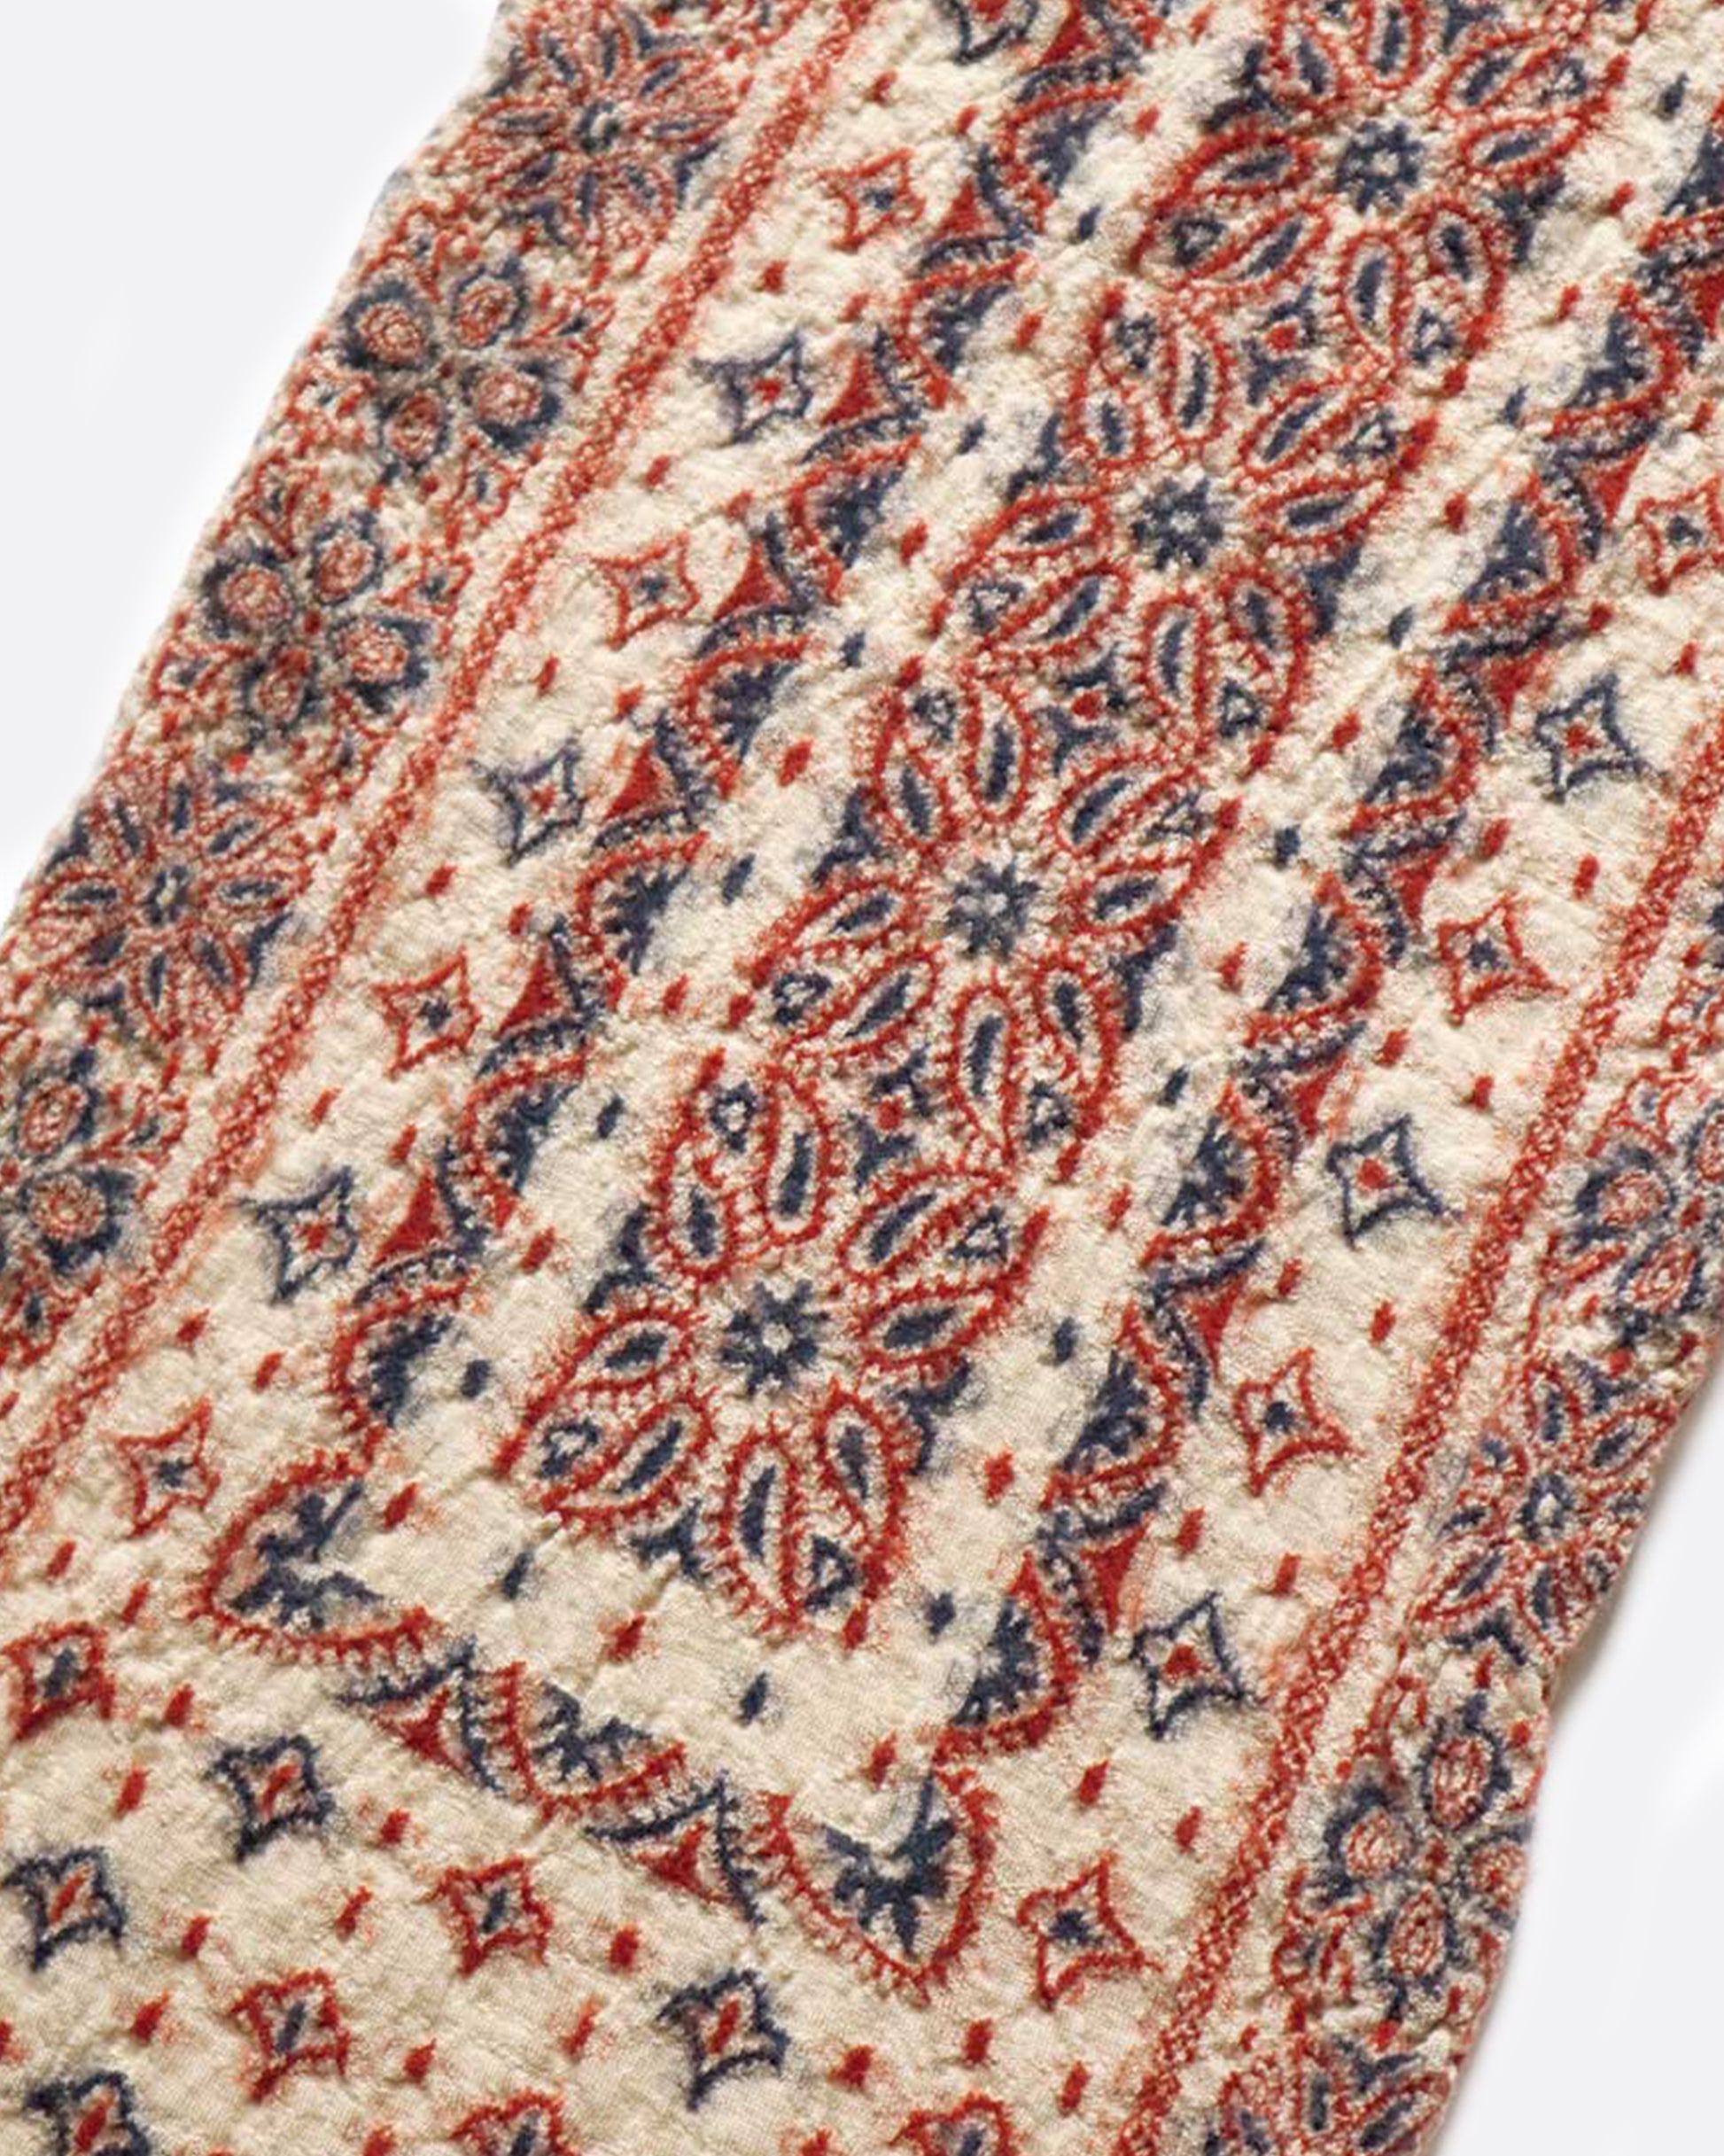 Inspired by vintage bandanas, this scarf is a little bit narrower than most - making even easier to wear. This time in shades of red, cream and blue.